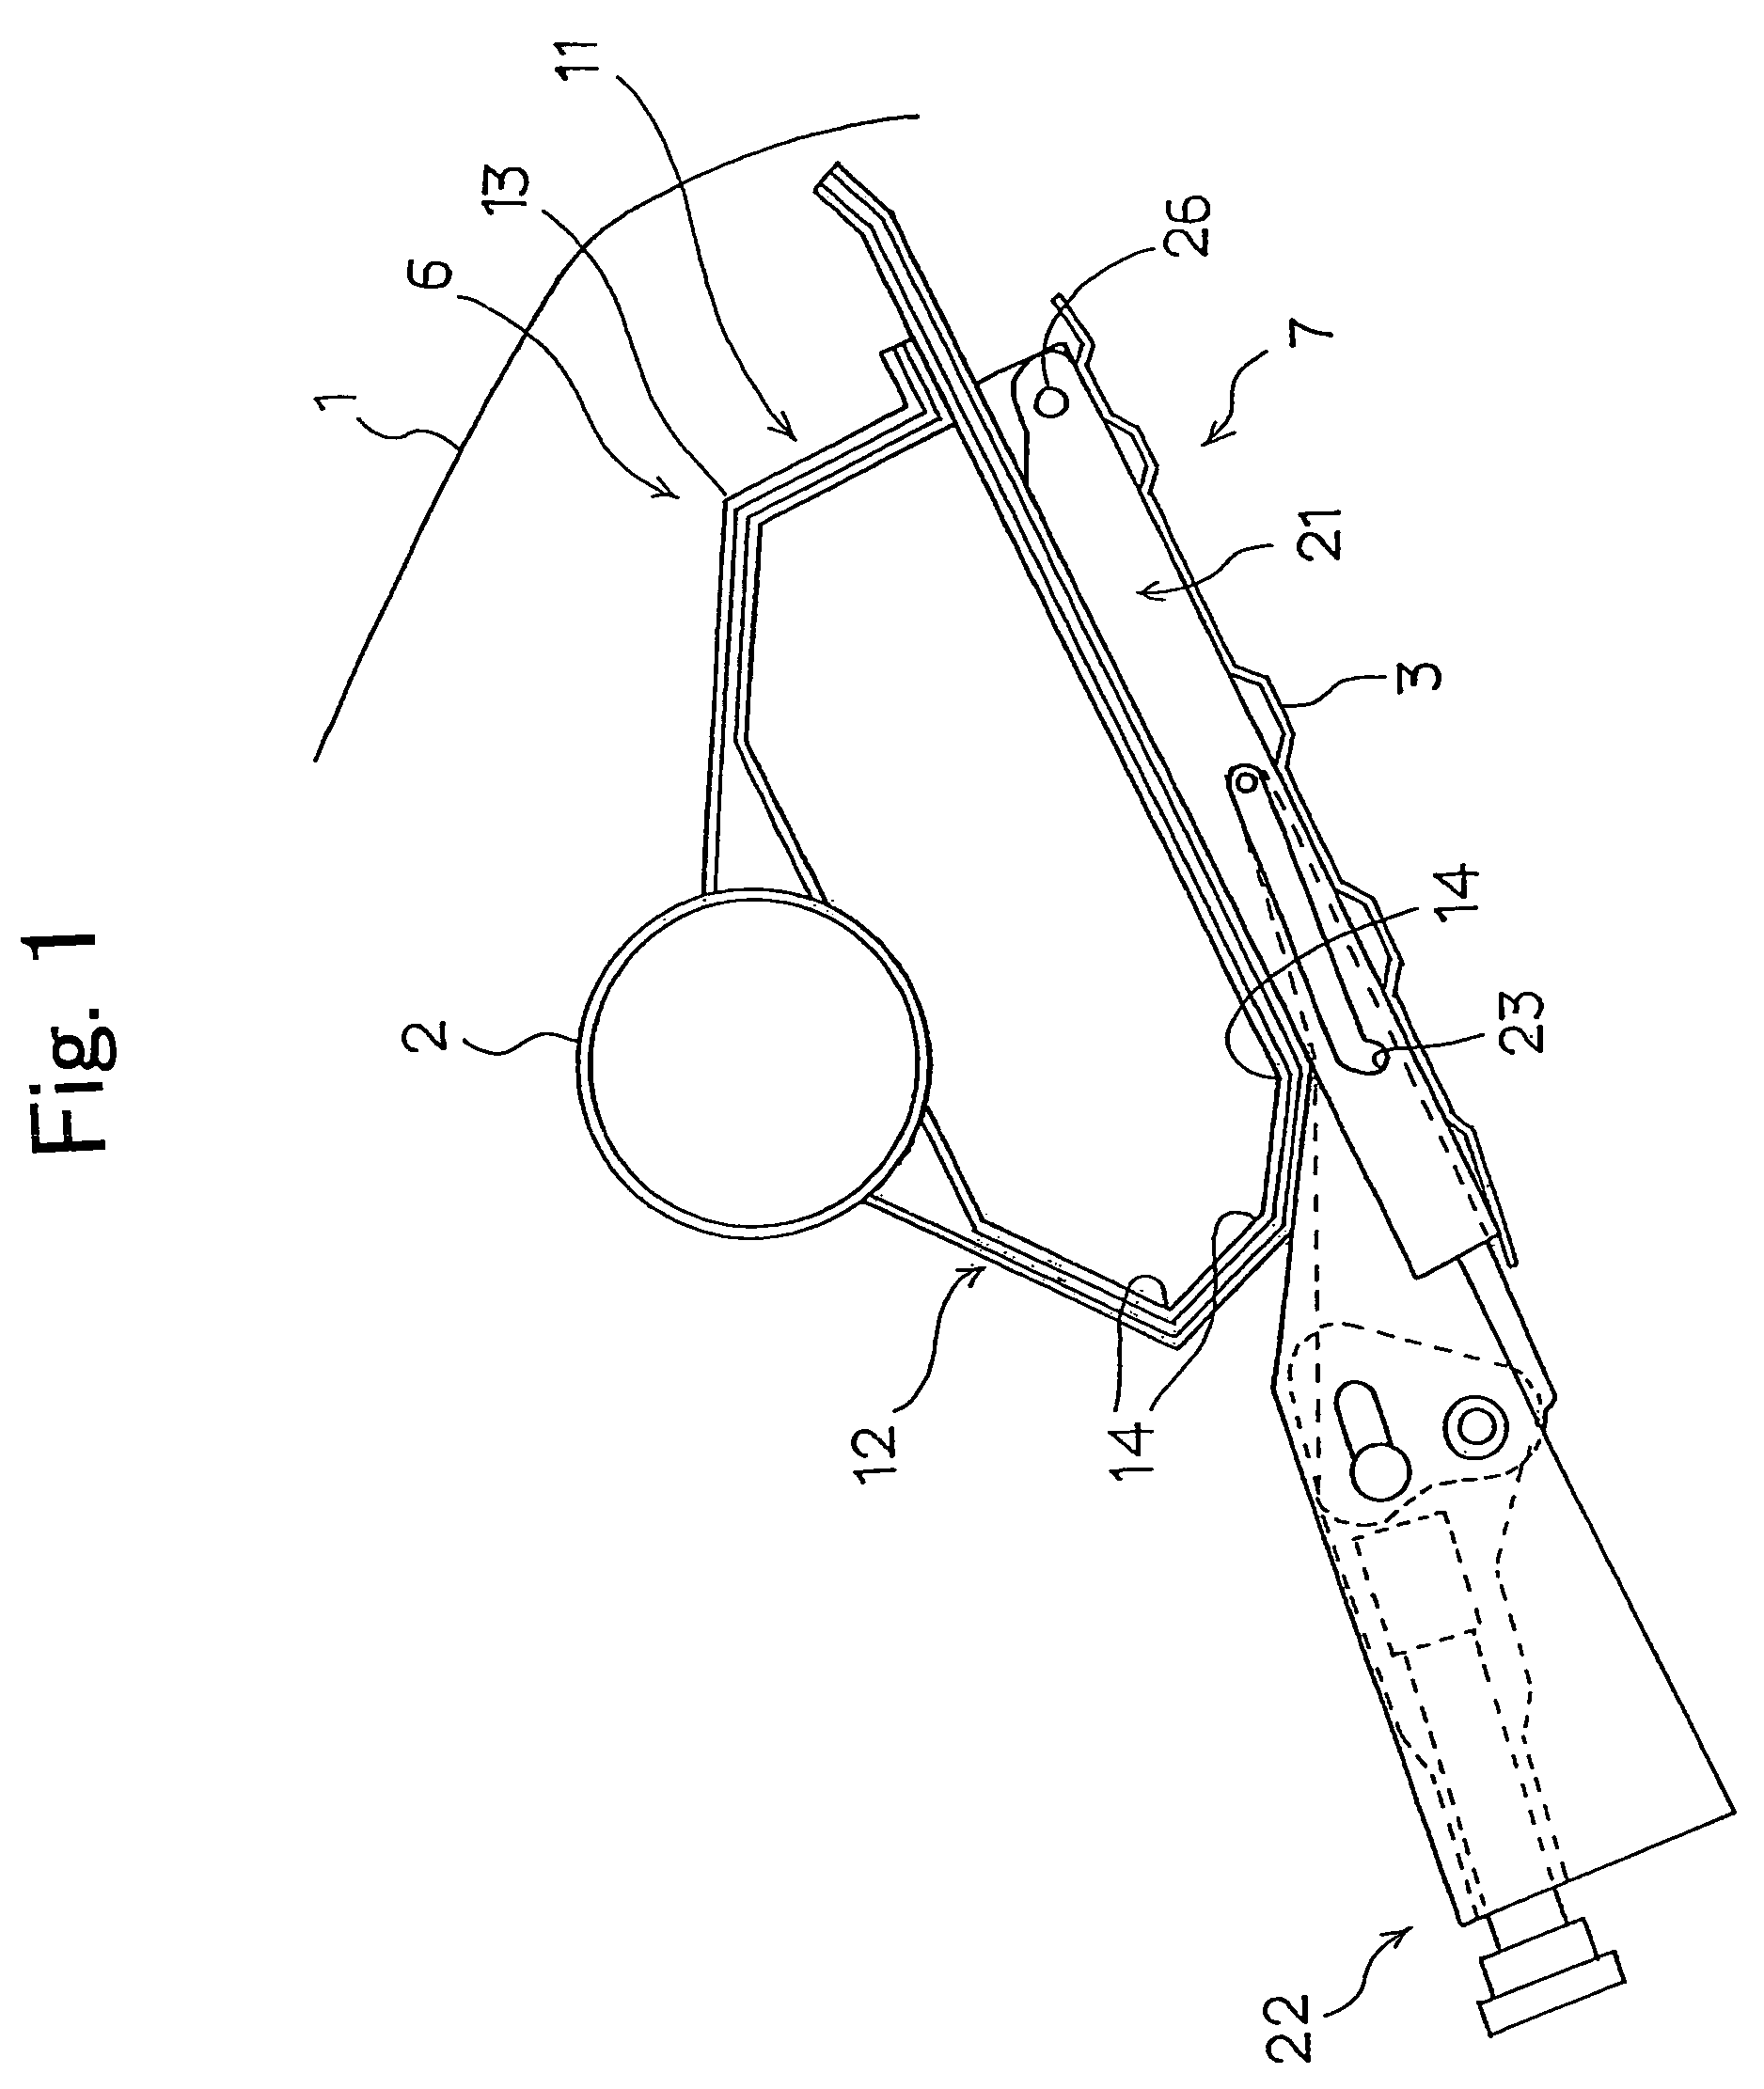 Knee bolster structure